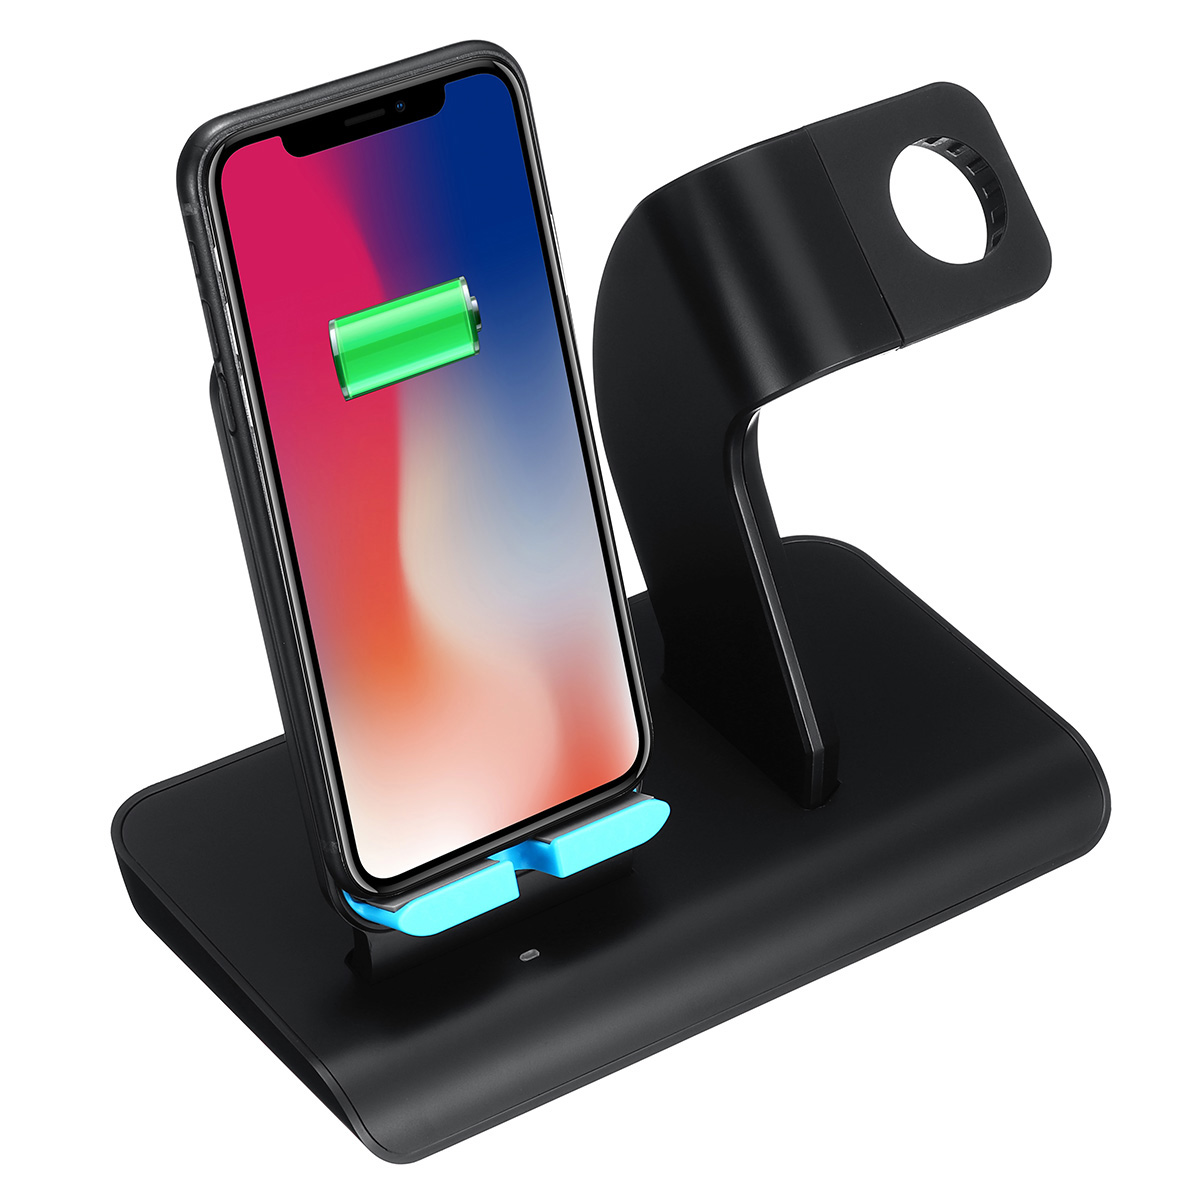 10W-2-In-1-Qi-Wireless-Charger-Fast-Charging-Phone-Watch-Holder-For-iPhone-Samsung-Huawei-Apple-Watc-1416645-3